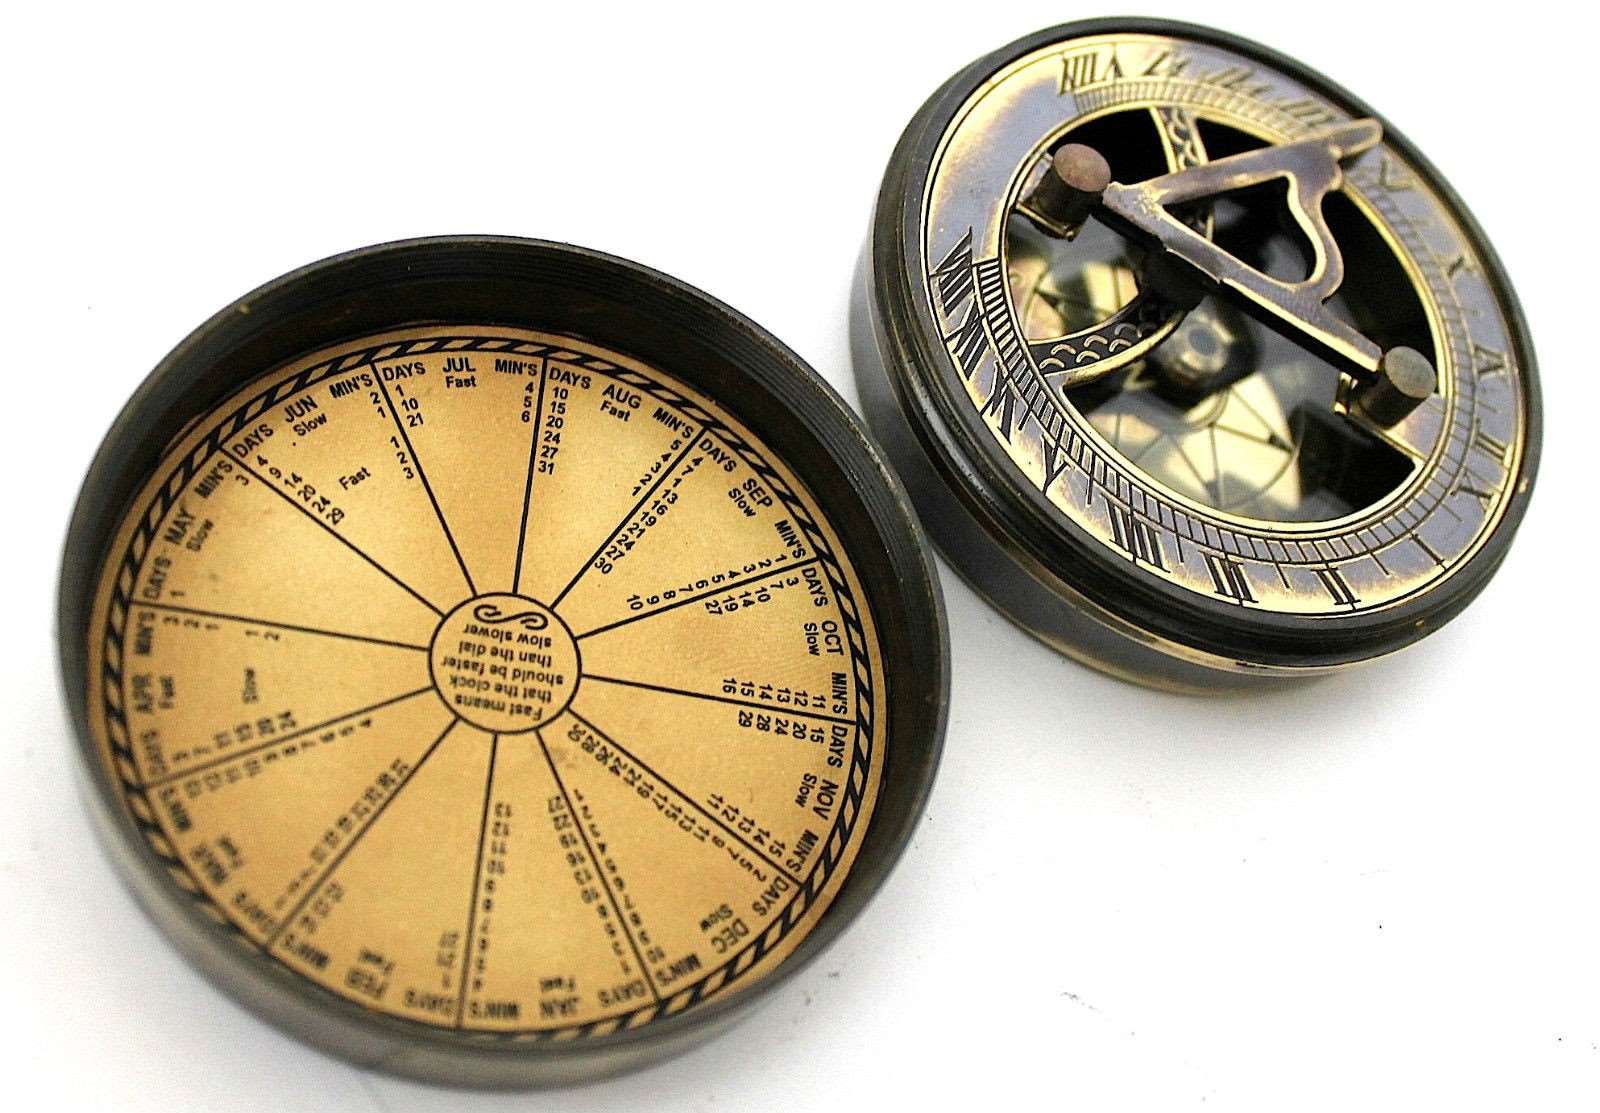 Personalized Brass Sundial Compass - Customizable Engraved Quote